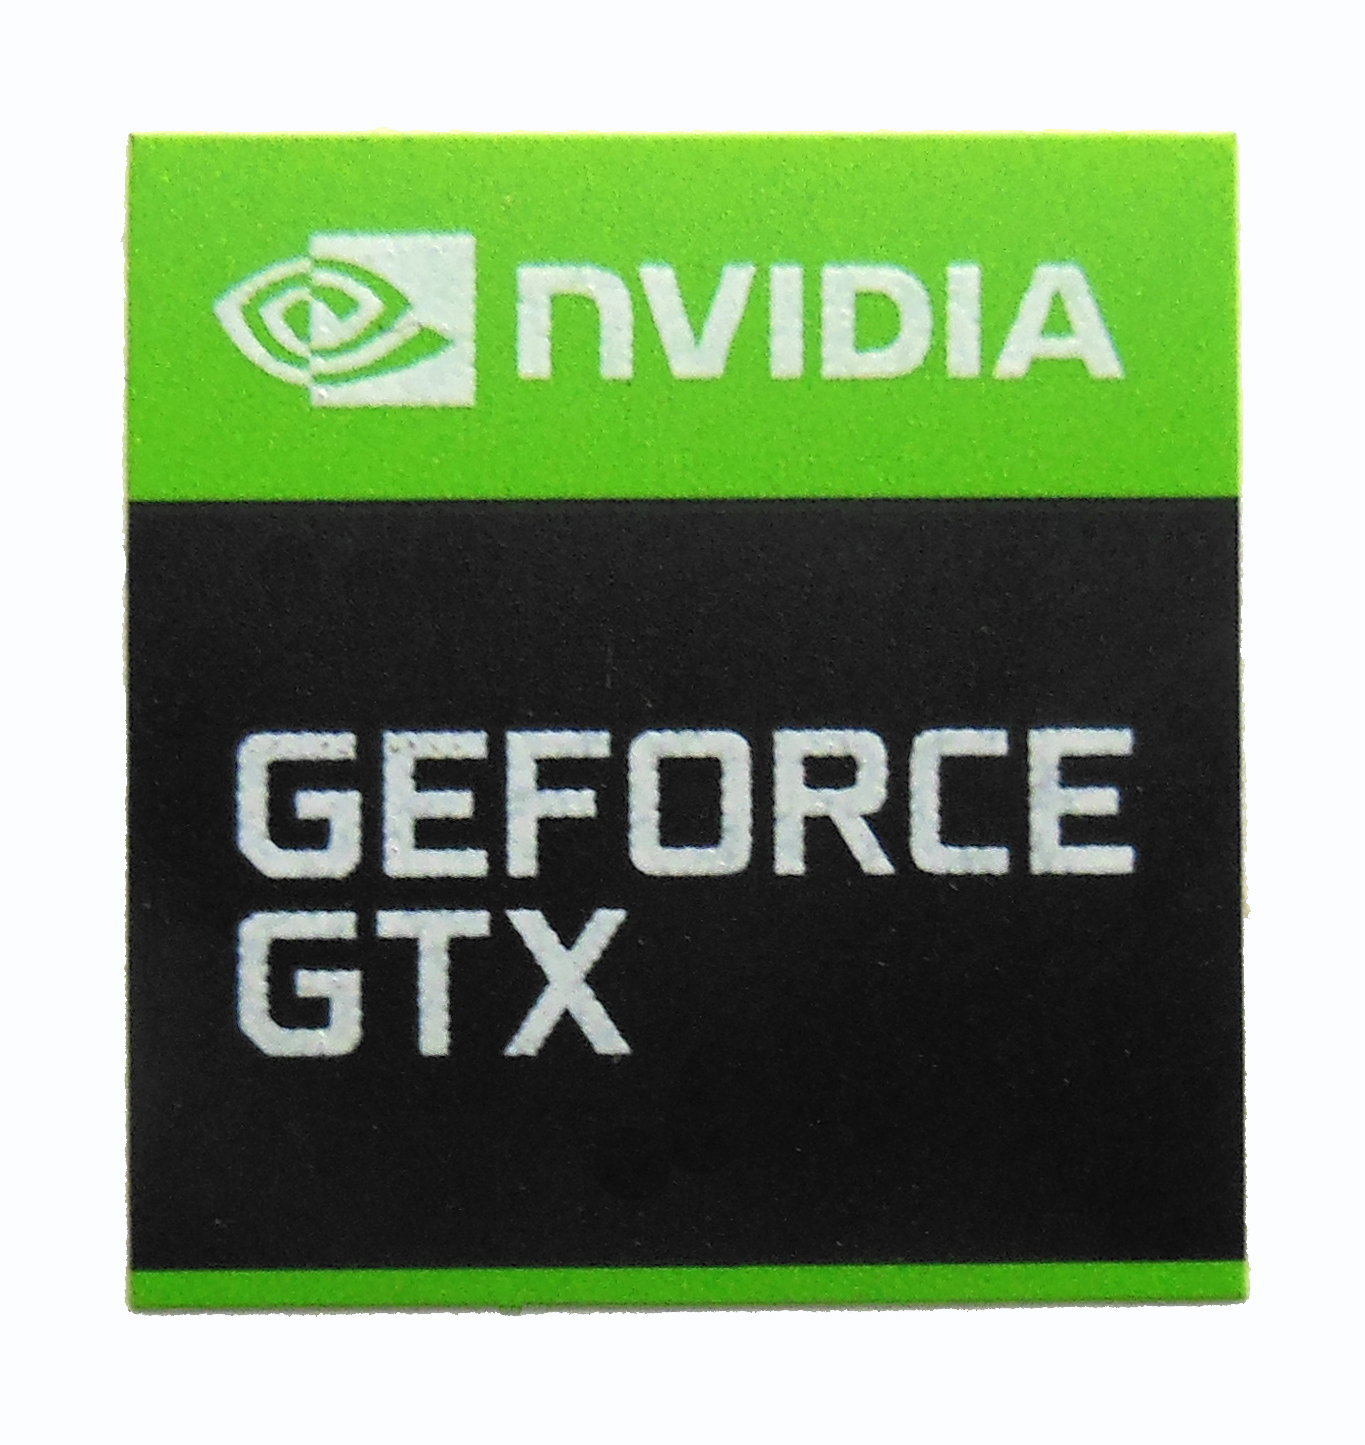 Lot of 50 Original Nvidia Geforce Replacement Stickers 18mm x 18mm For Desktop 